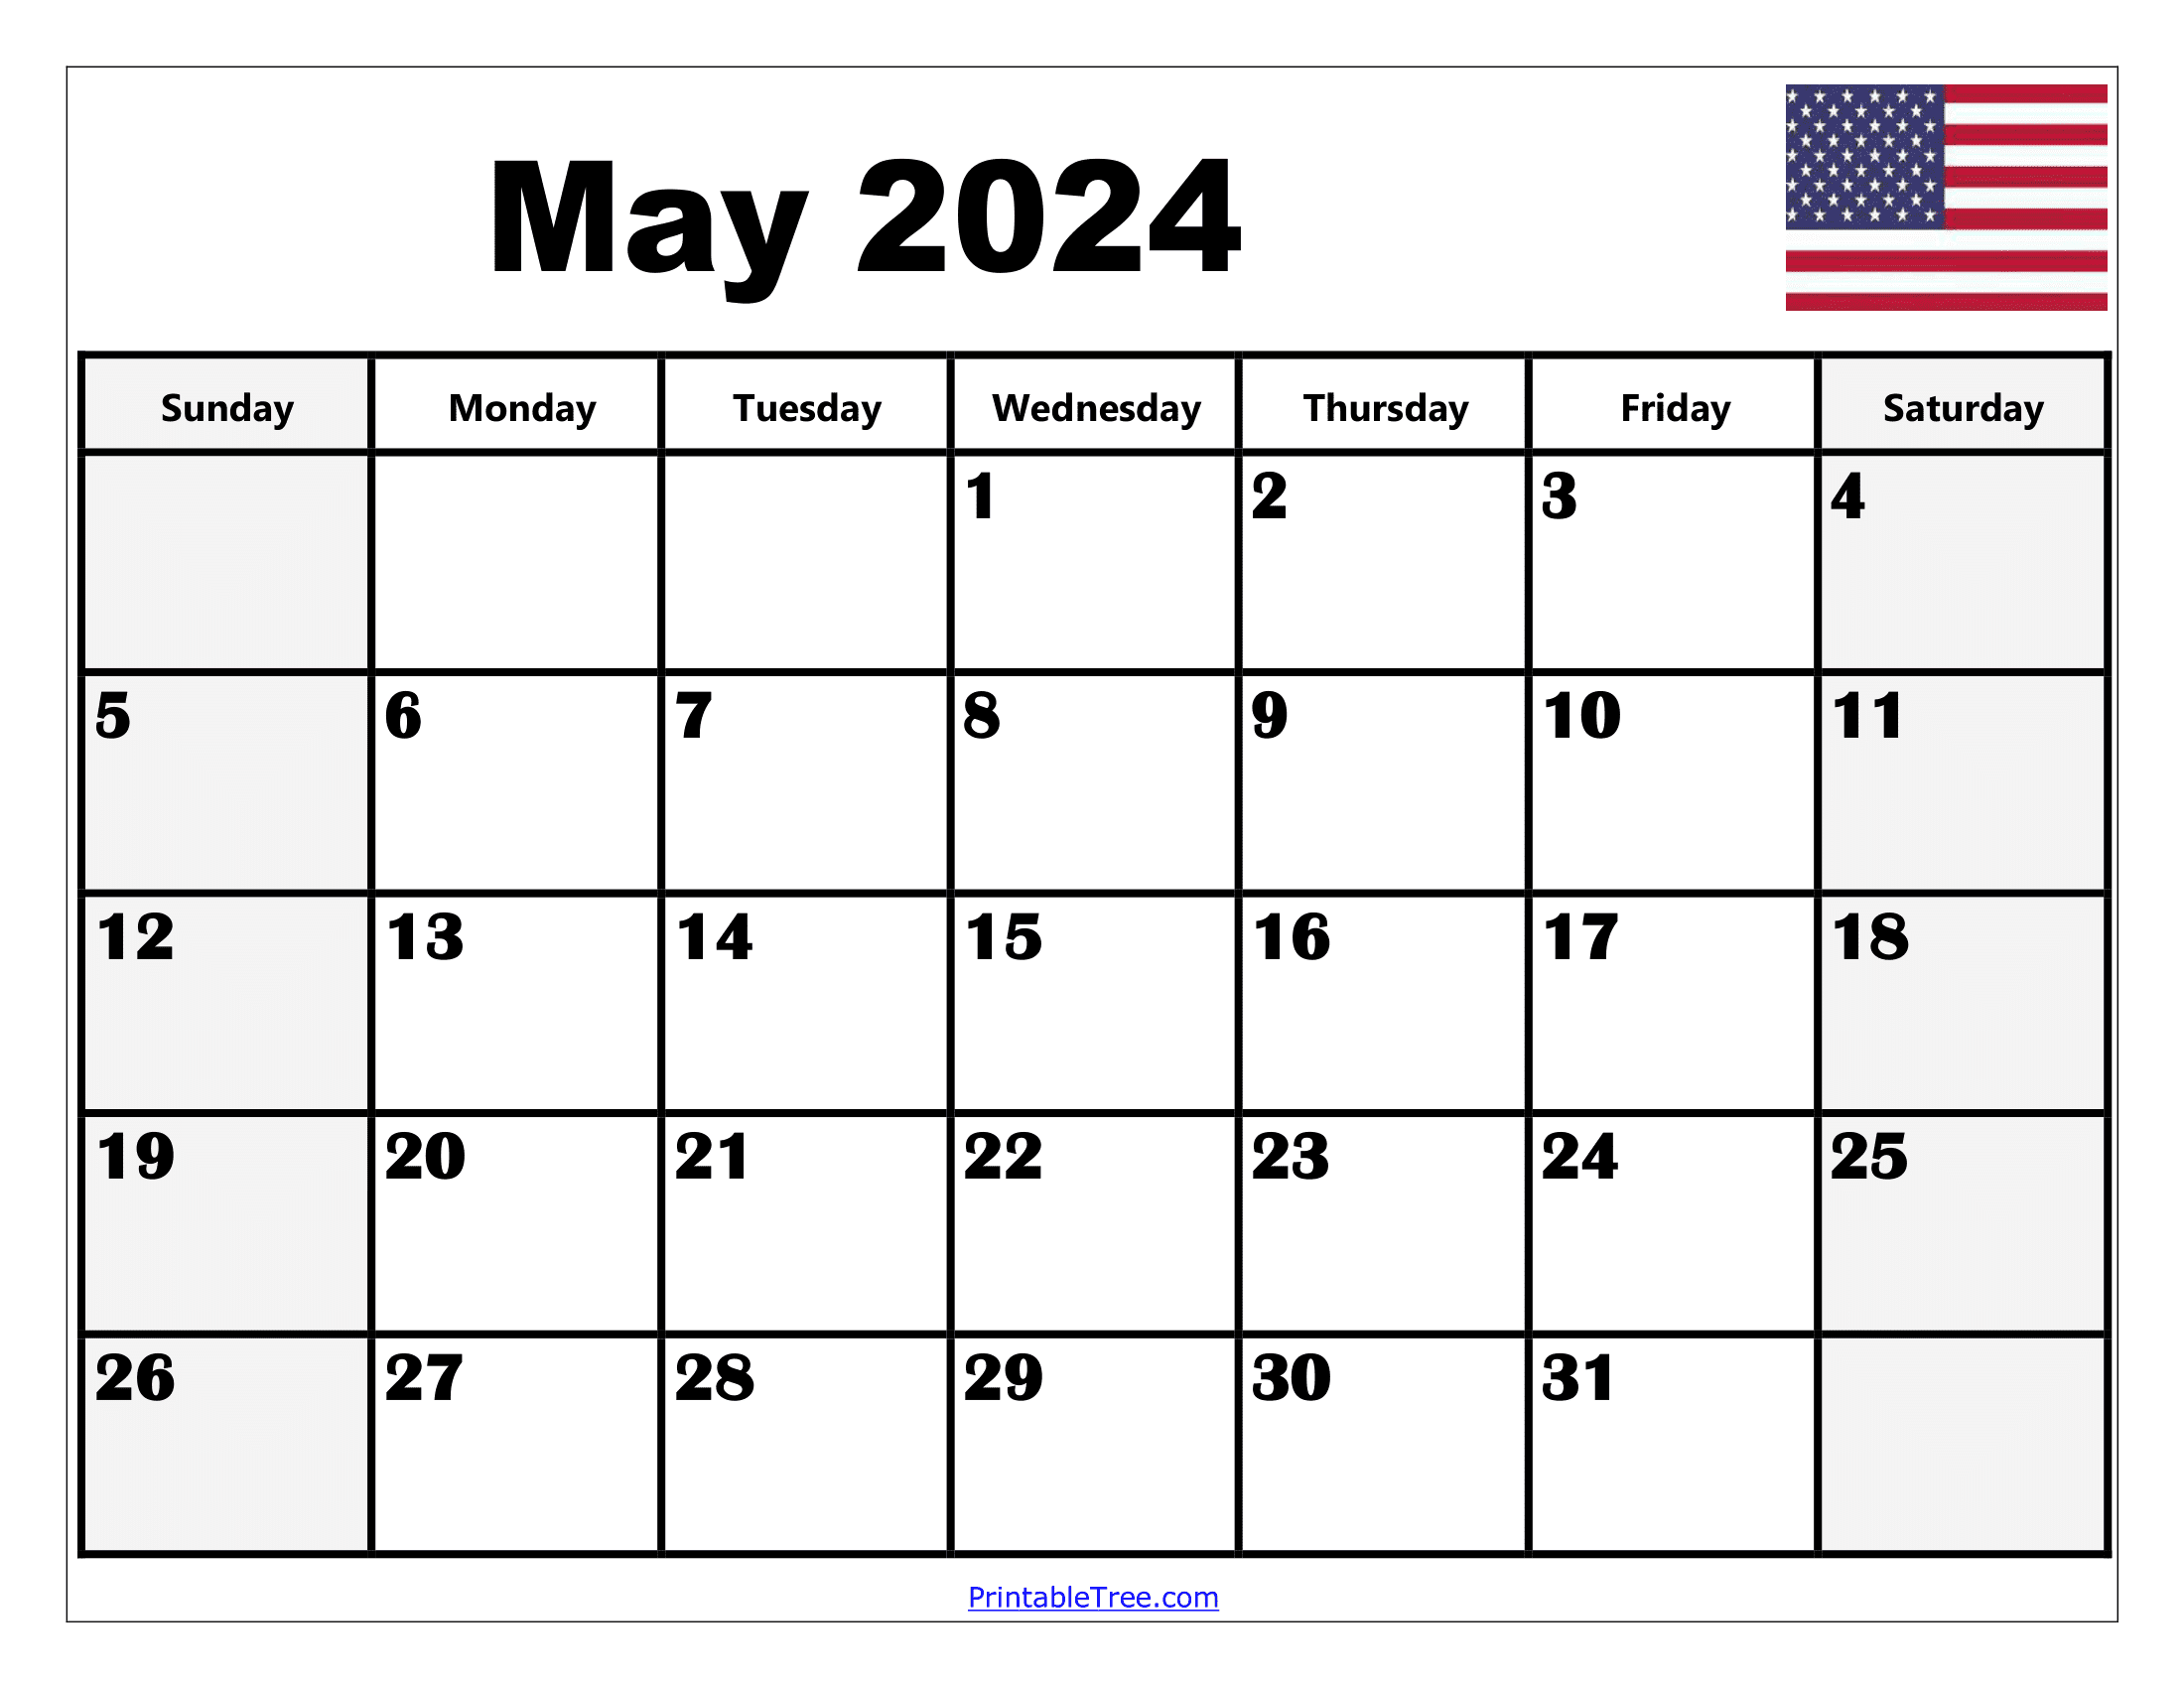 Blank May 2024 Calendar Printable Pdf Templates With Holidays for Monthly Calendar May 2024 Printable